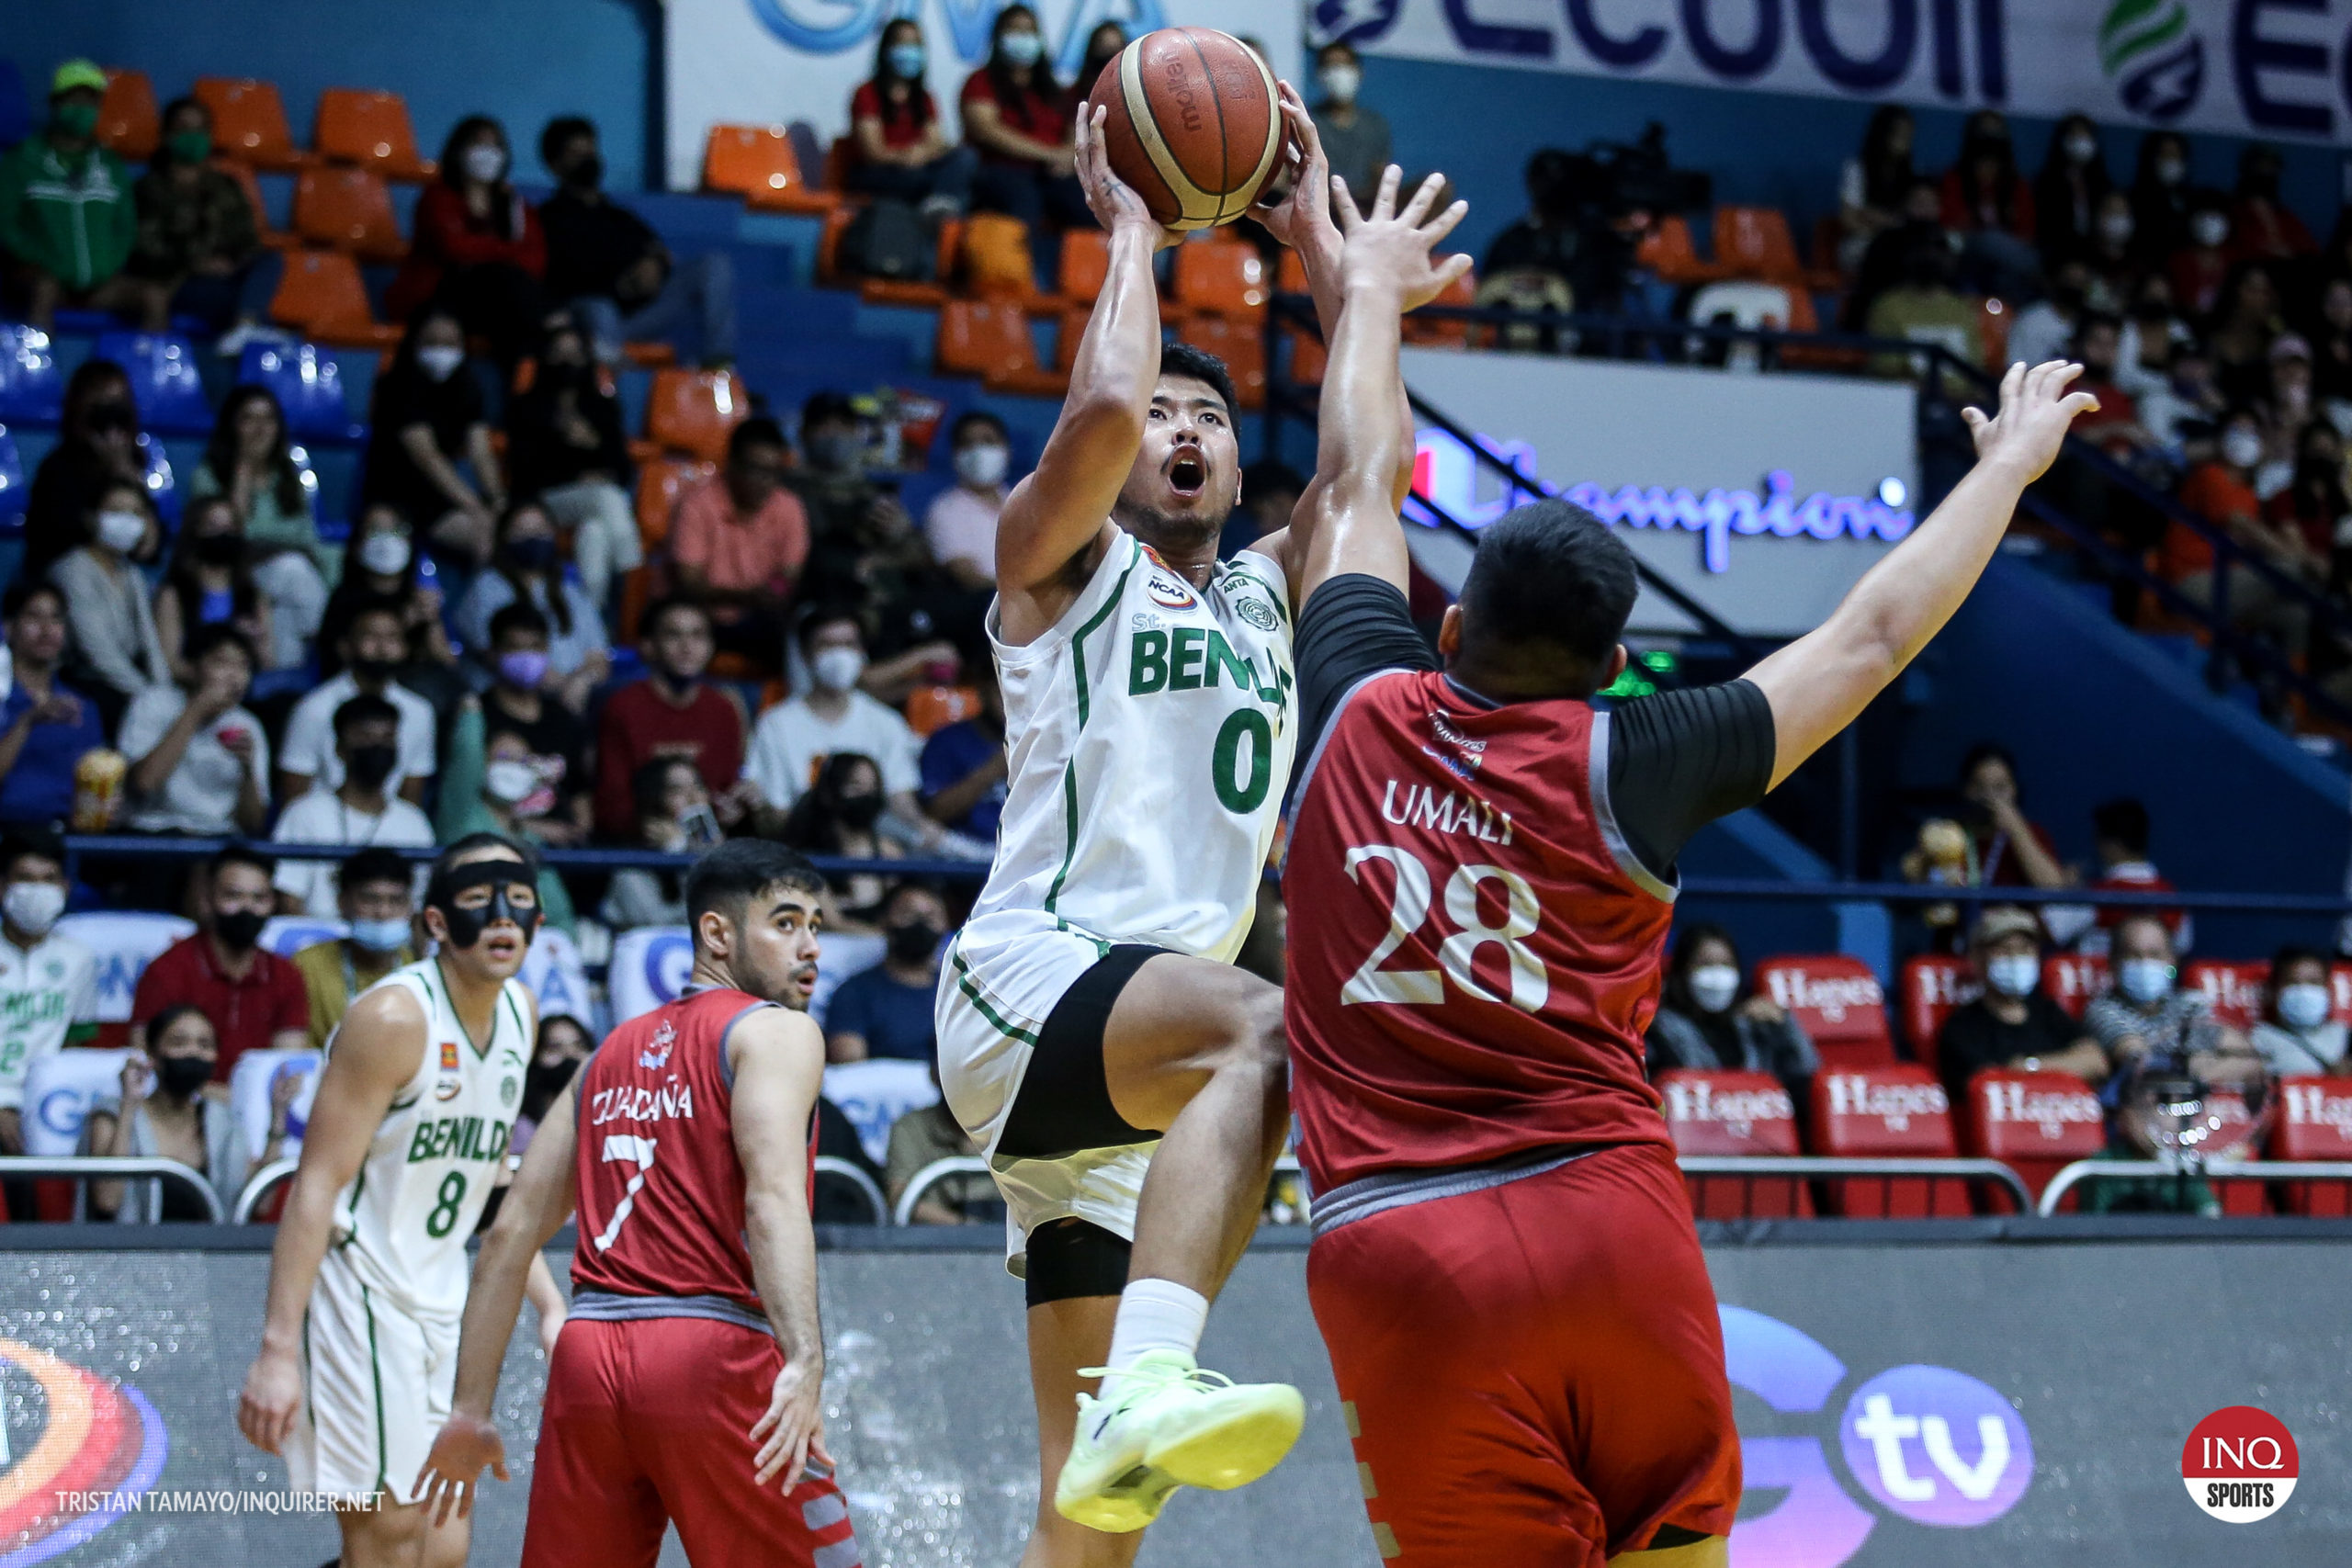 St. Benilde’s Will Gozum (right) produces a double-double in the victory. —NCAA/GMA